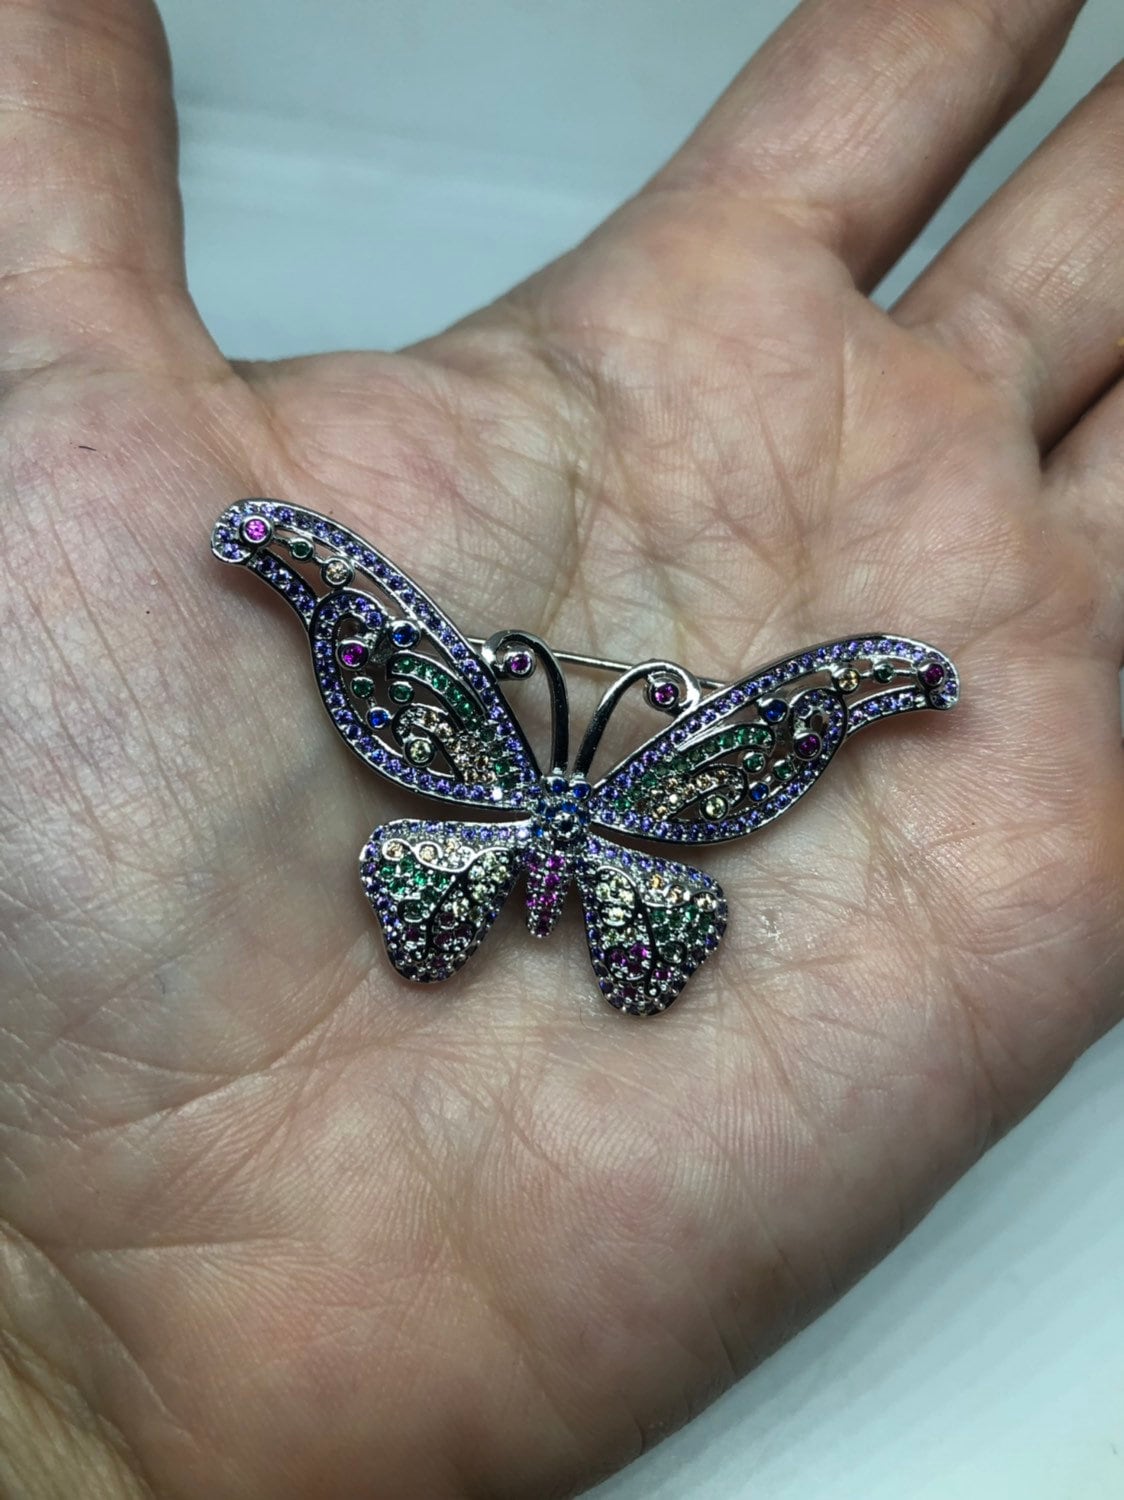 Vintage pastel Crystal Gothic Styled Silver Finished Butterfly Broach